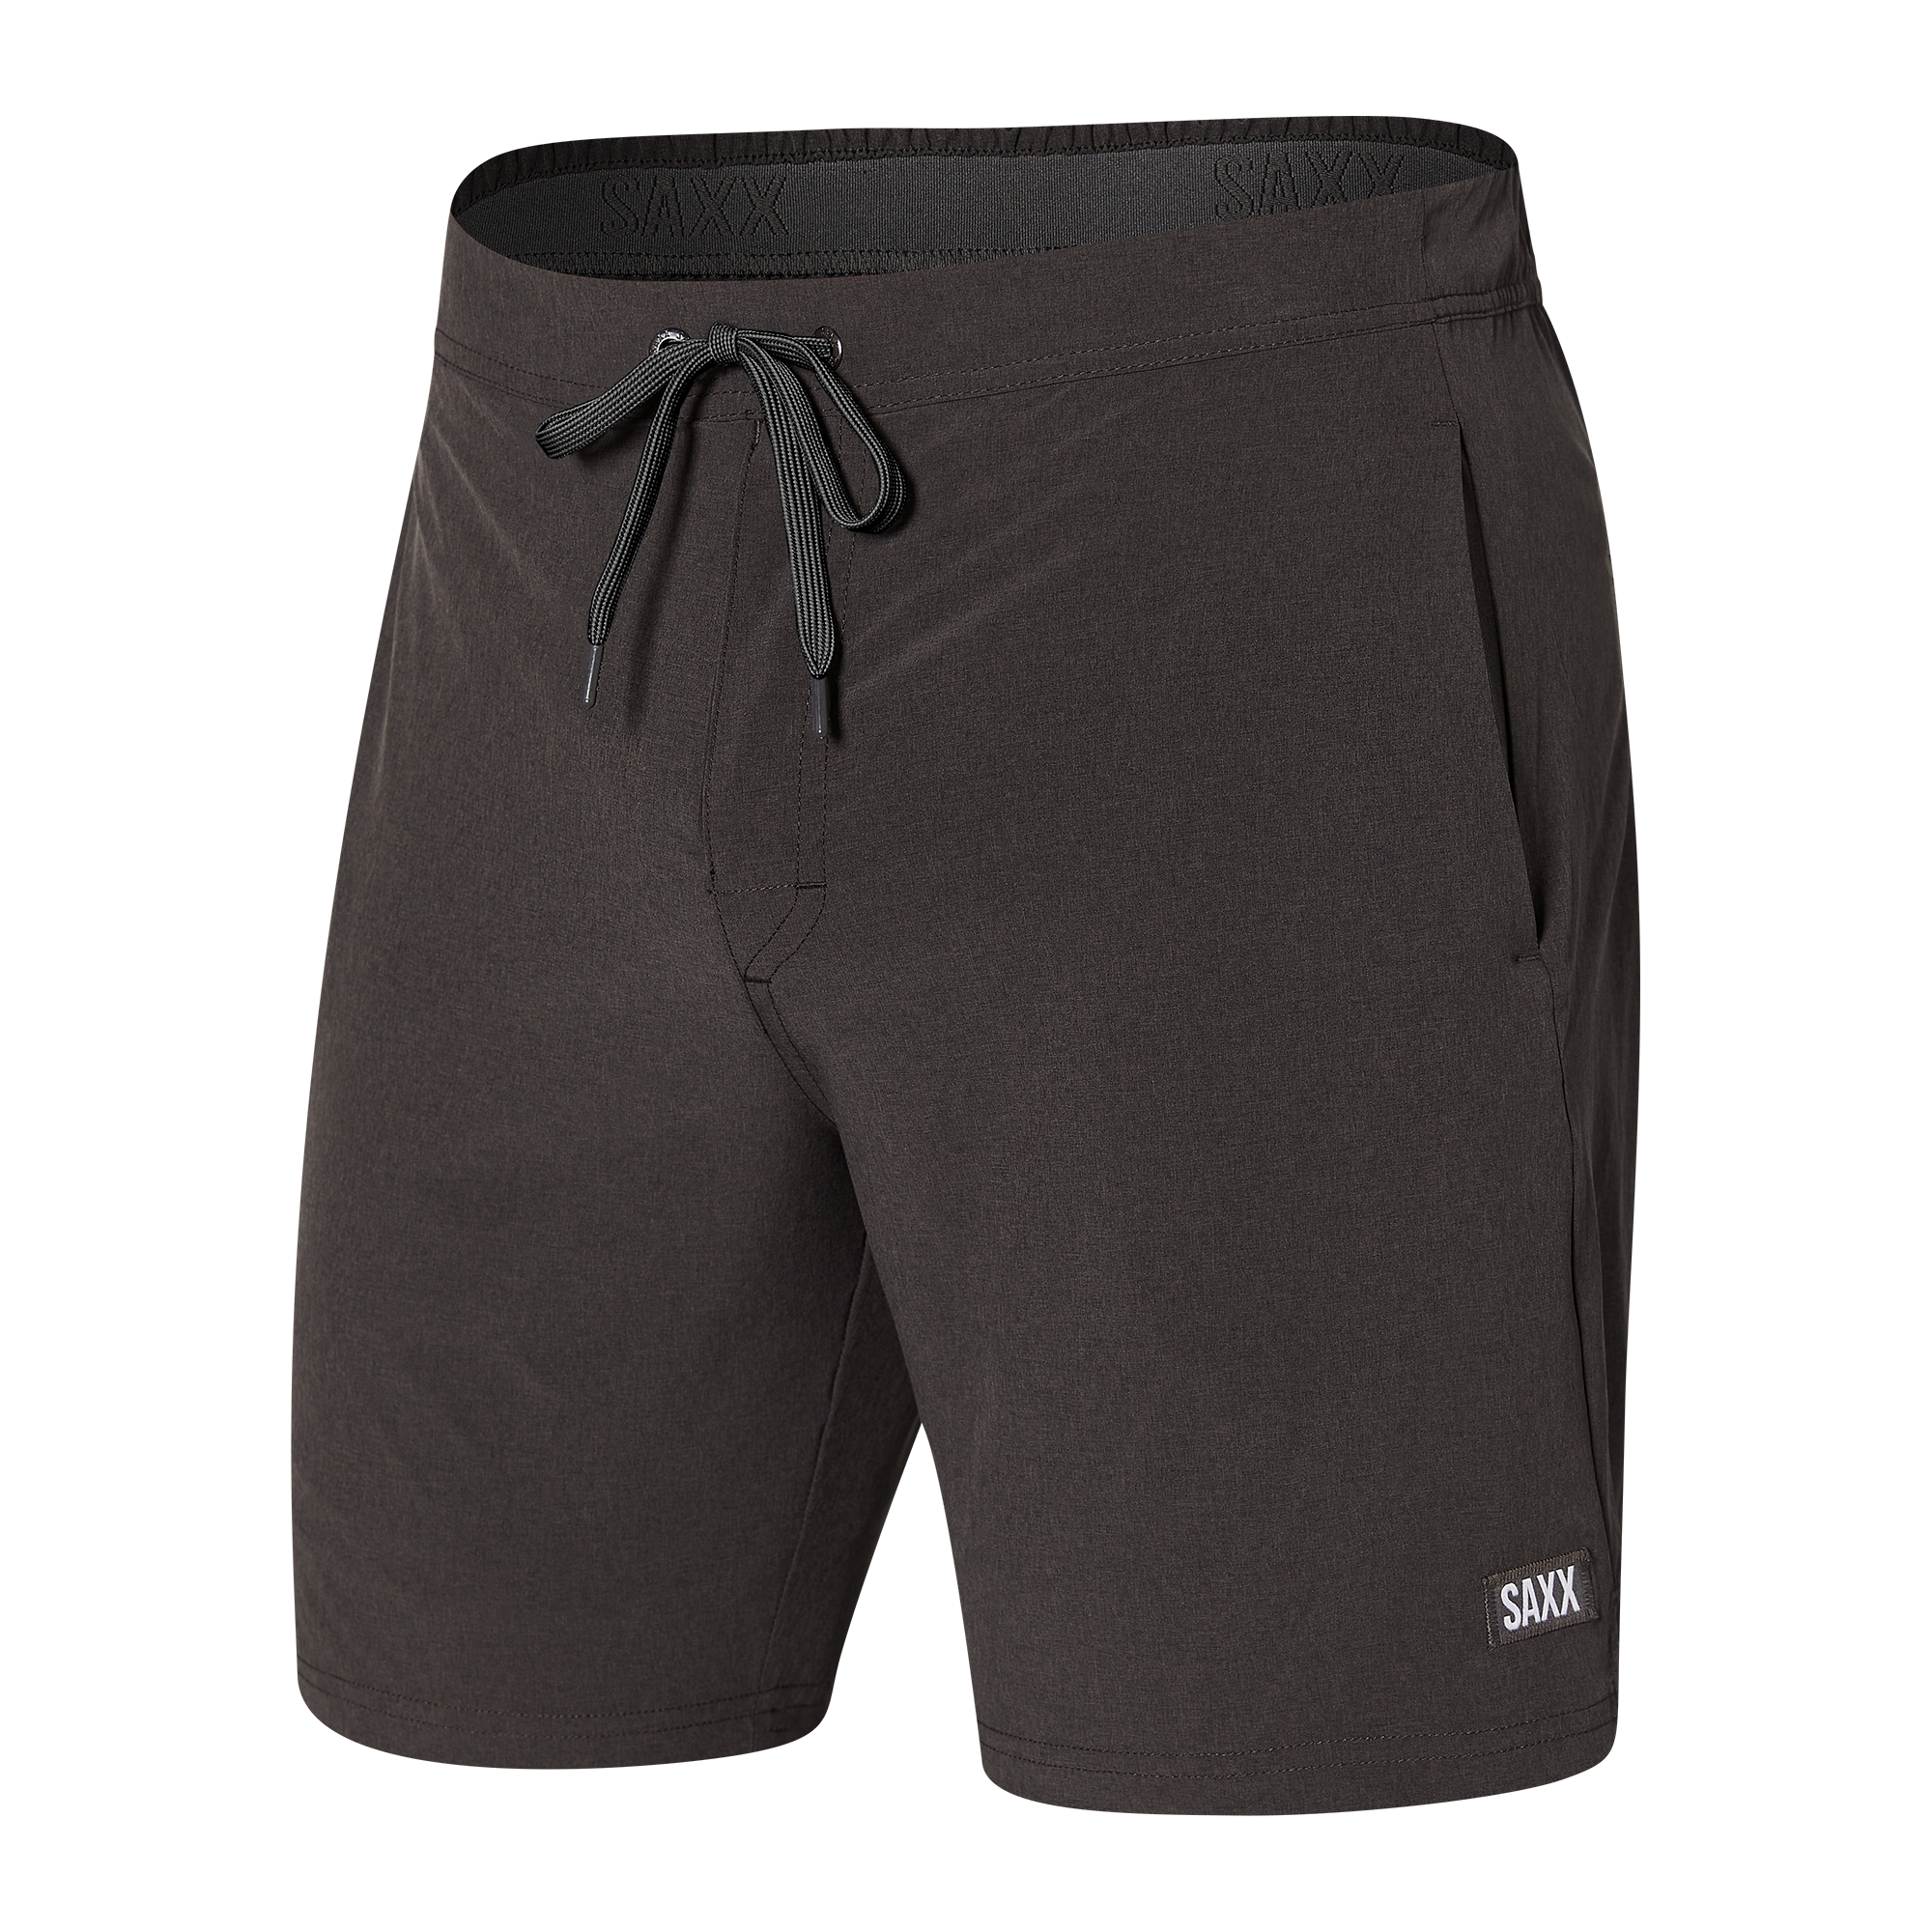 Front of Sport 2 Life 2N1 Short 7" in Faded Black Heather